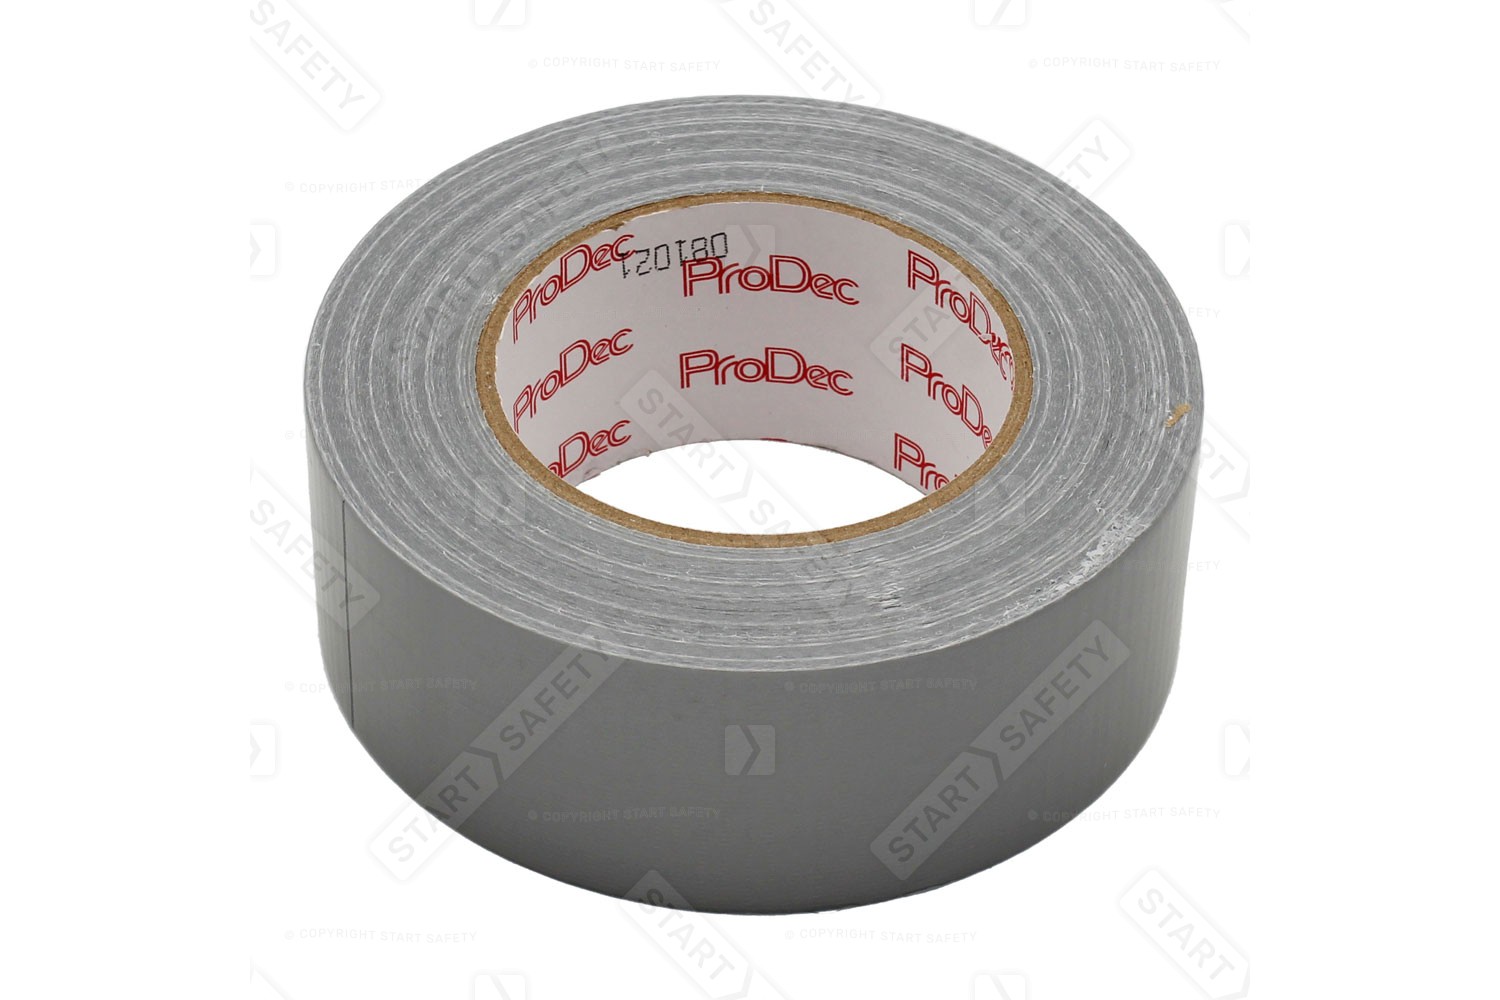 Prodec Duct Tape On Its Side